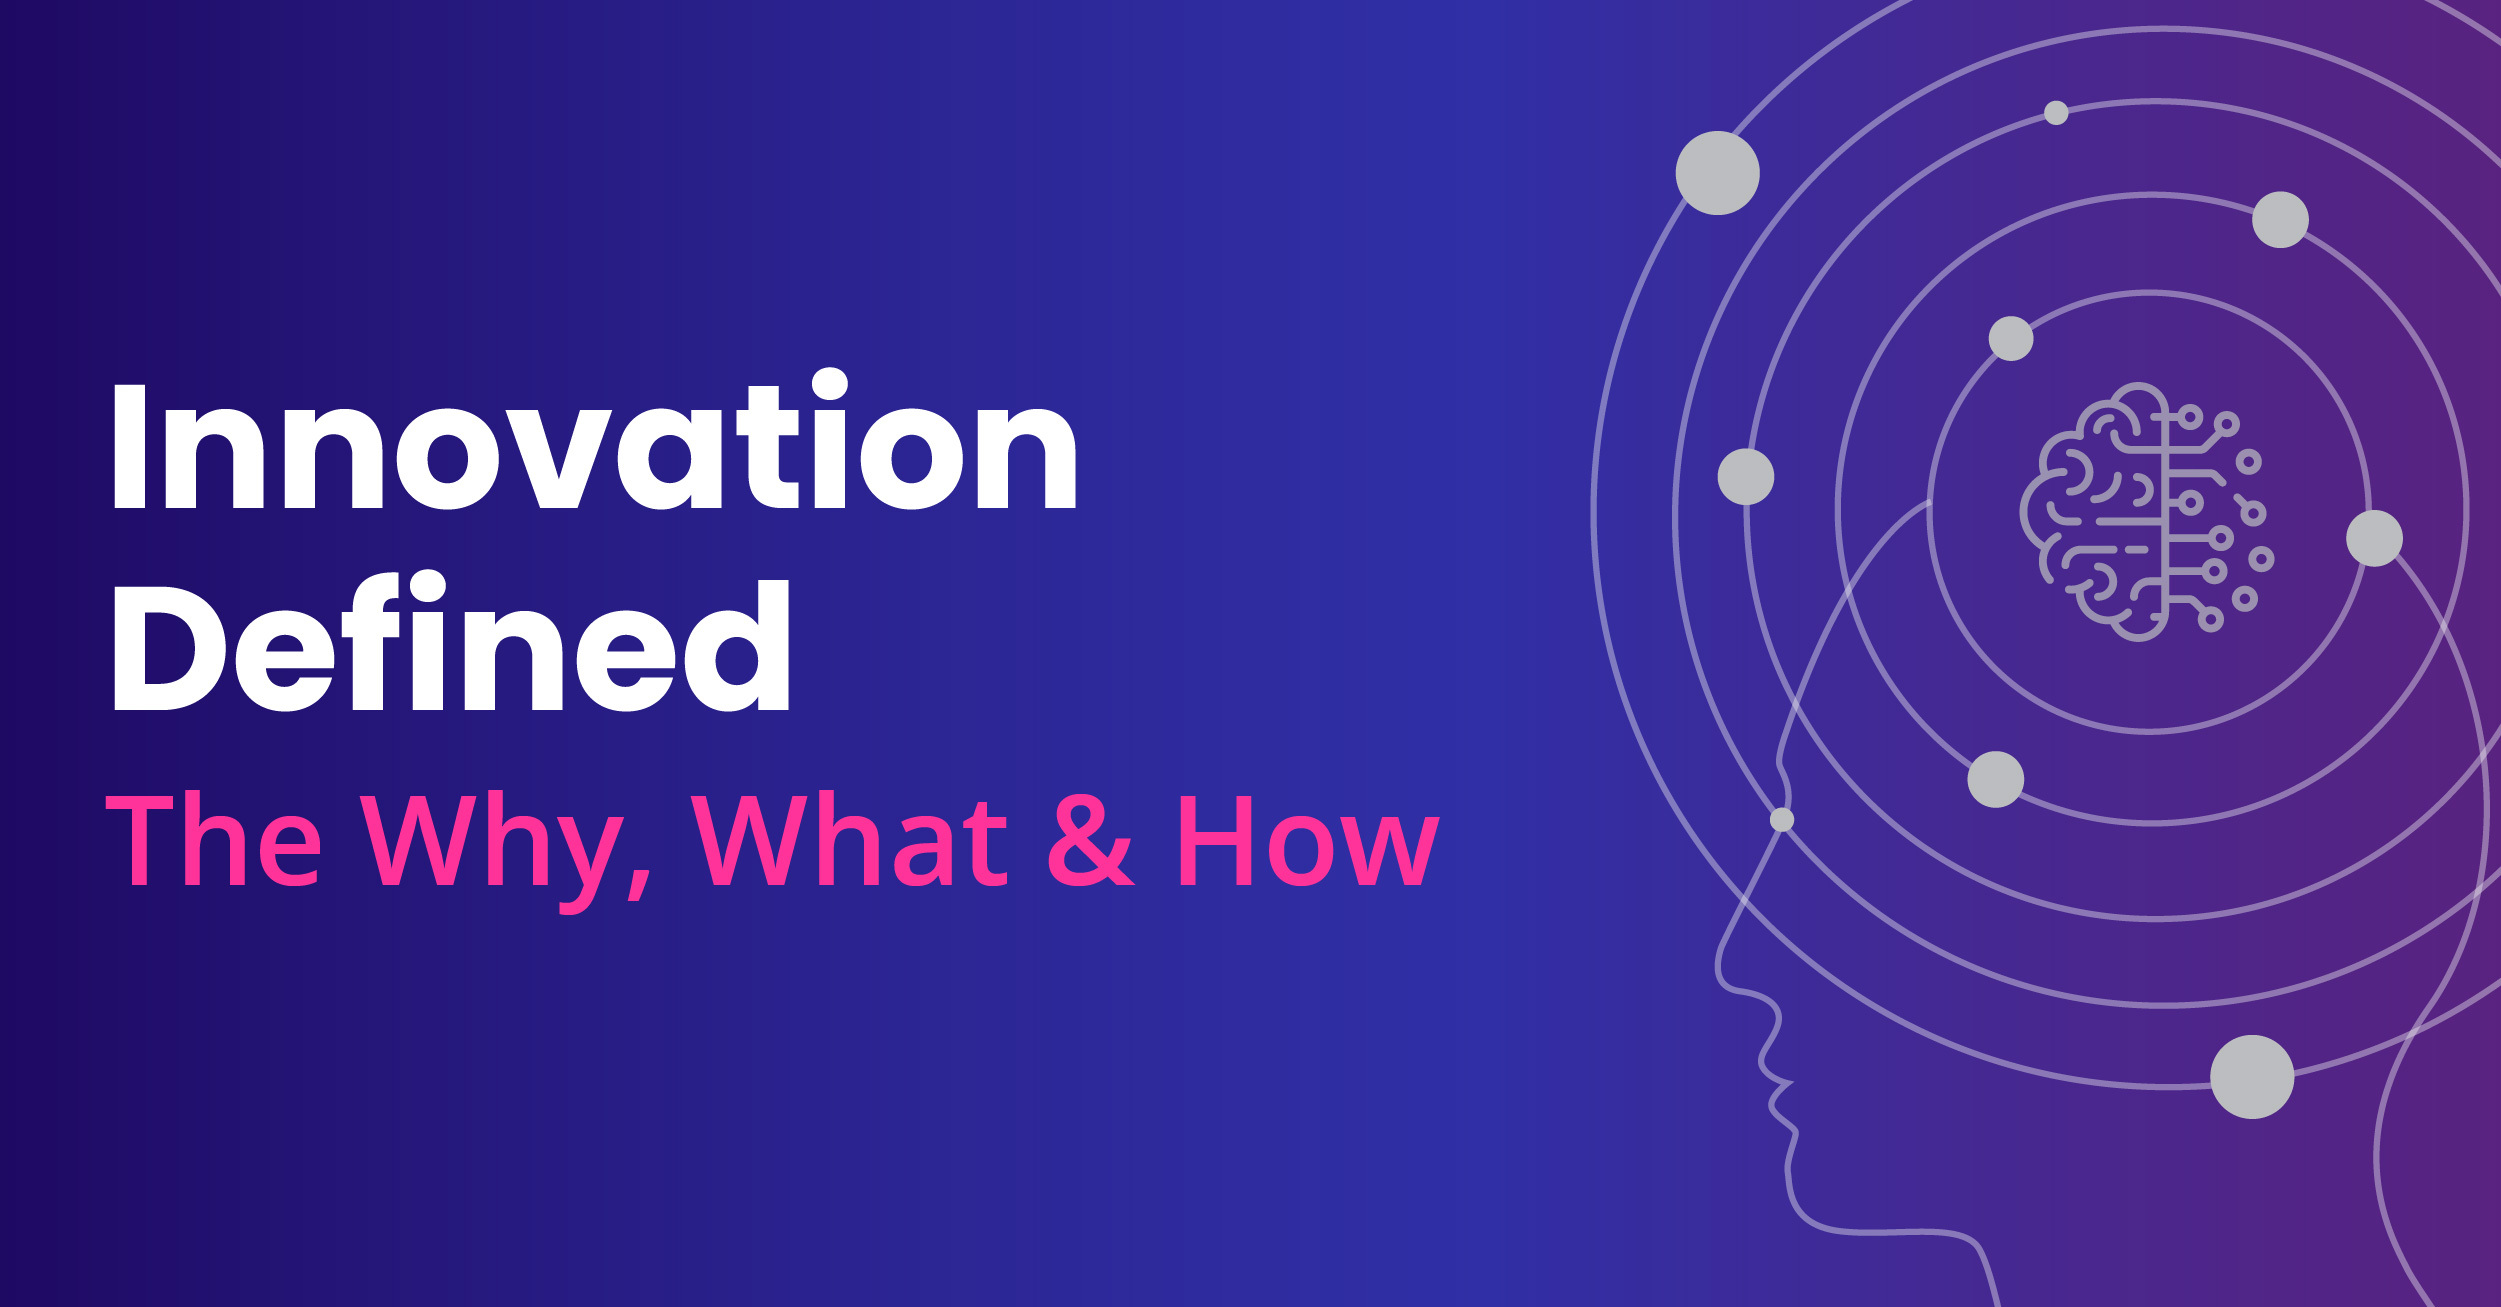 Innovation Defined: The Why, What & How